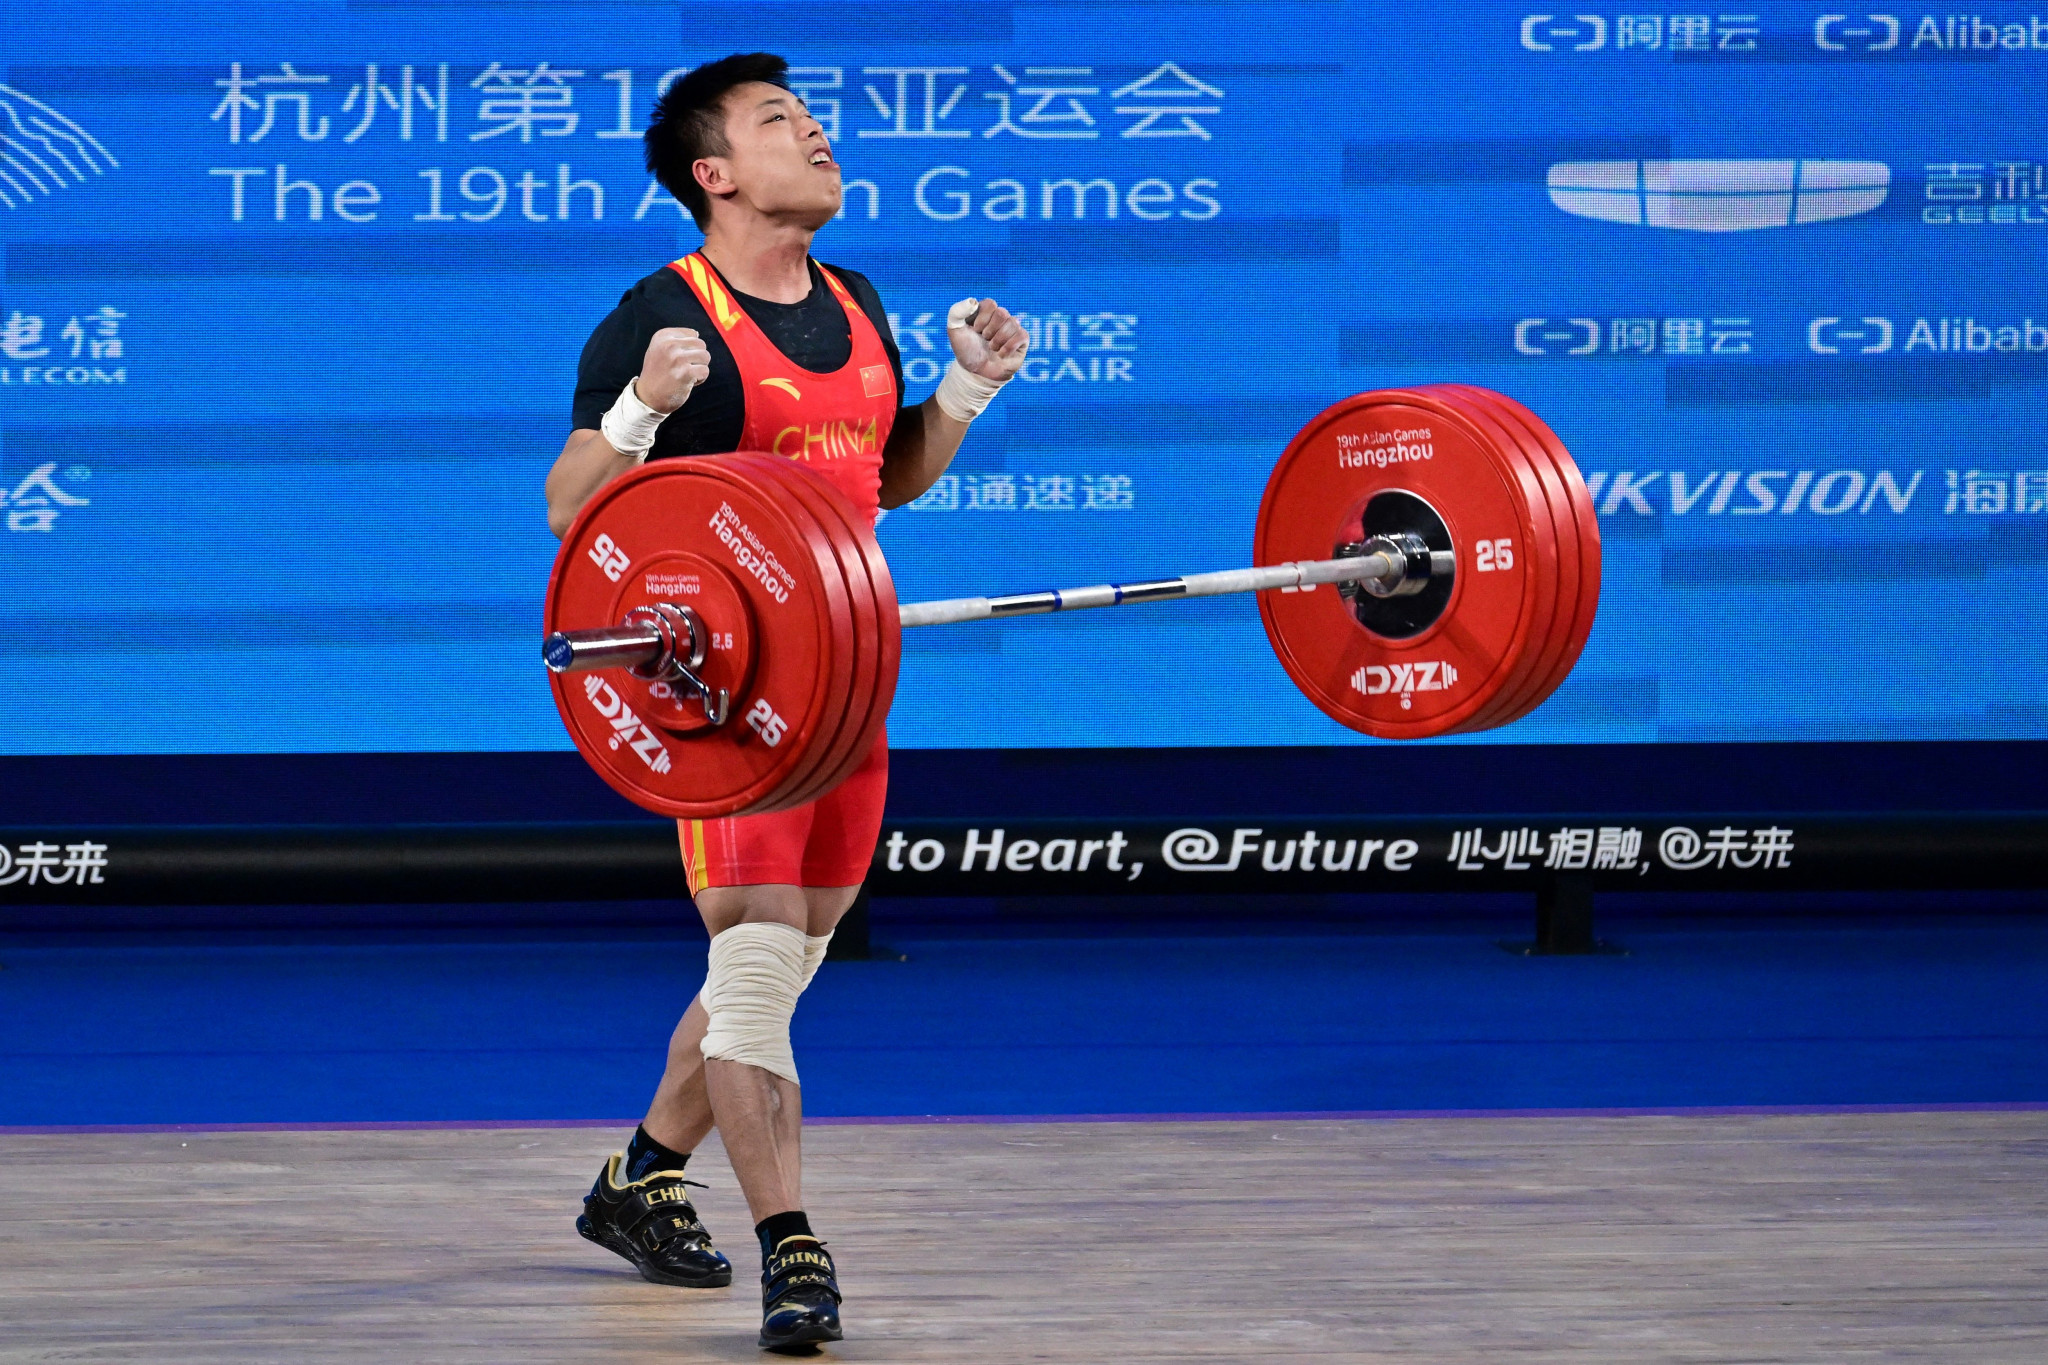 Chen Lijun of China won the men's 67 kilograms title after North Korean lifters missed chances in Hangzhou ©Getty Images